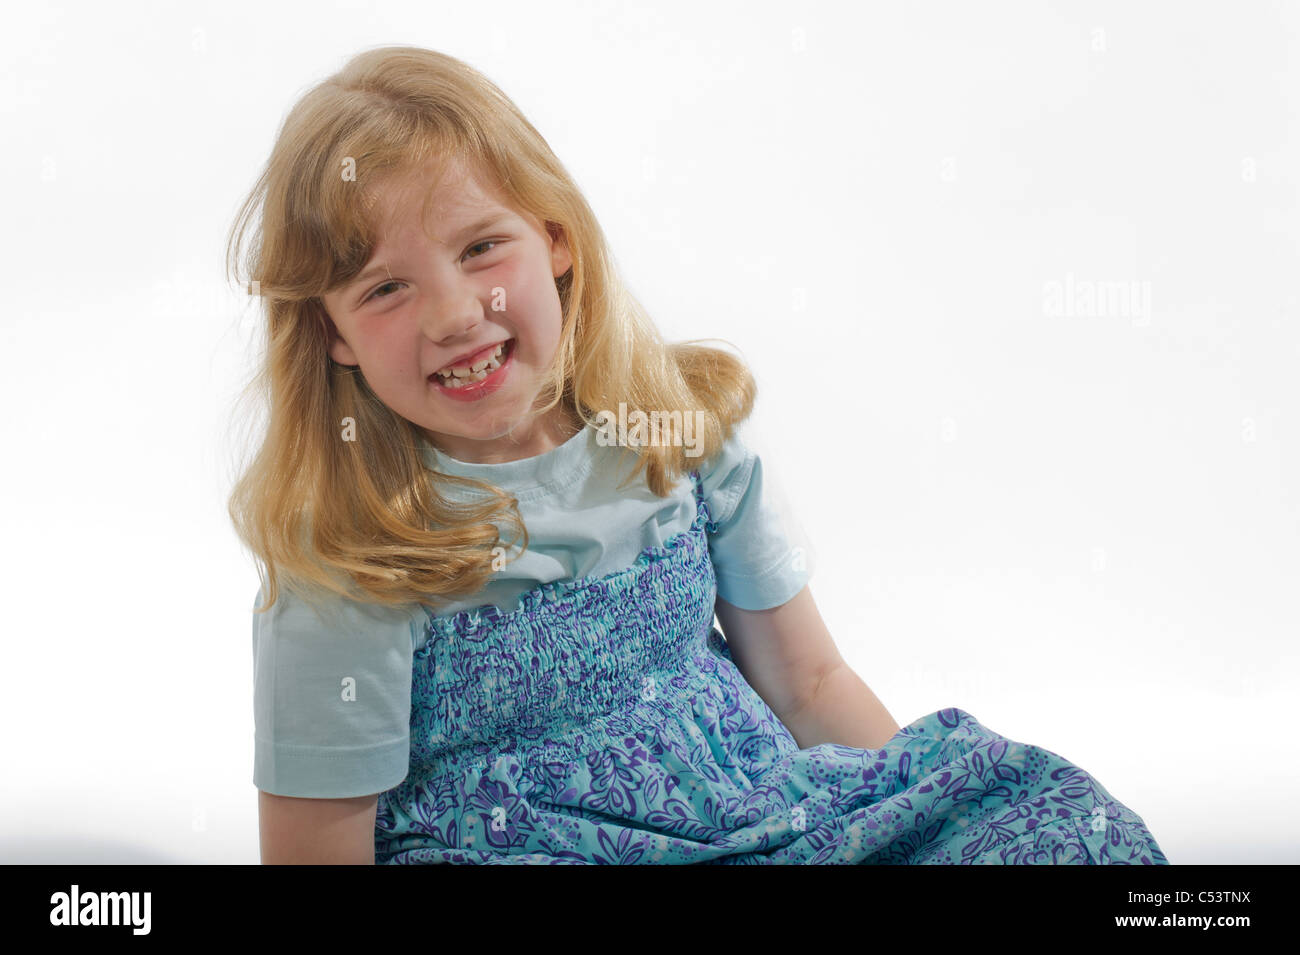 An image of young girl giggling and laughing against a plain white studio background. Stock Photo